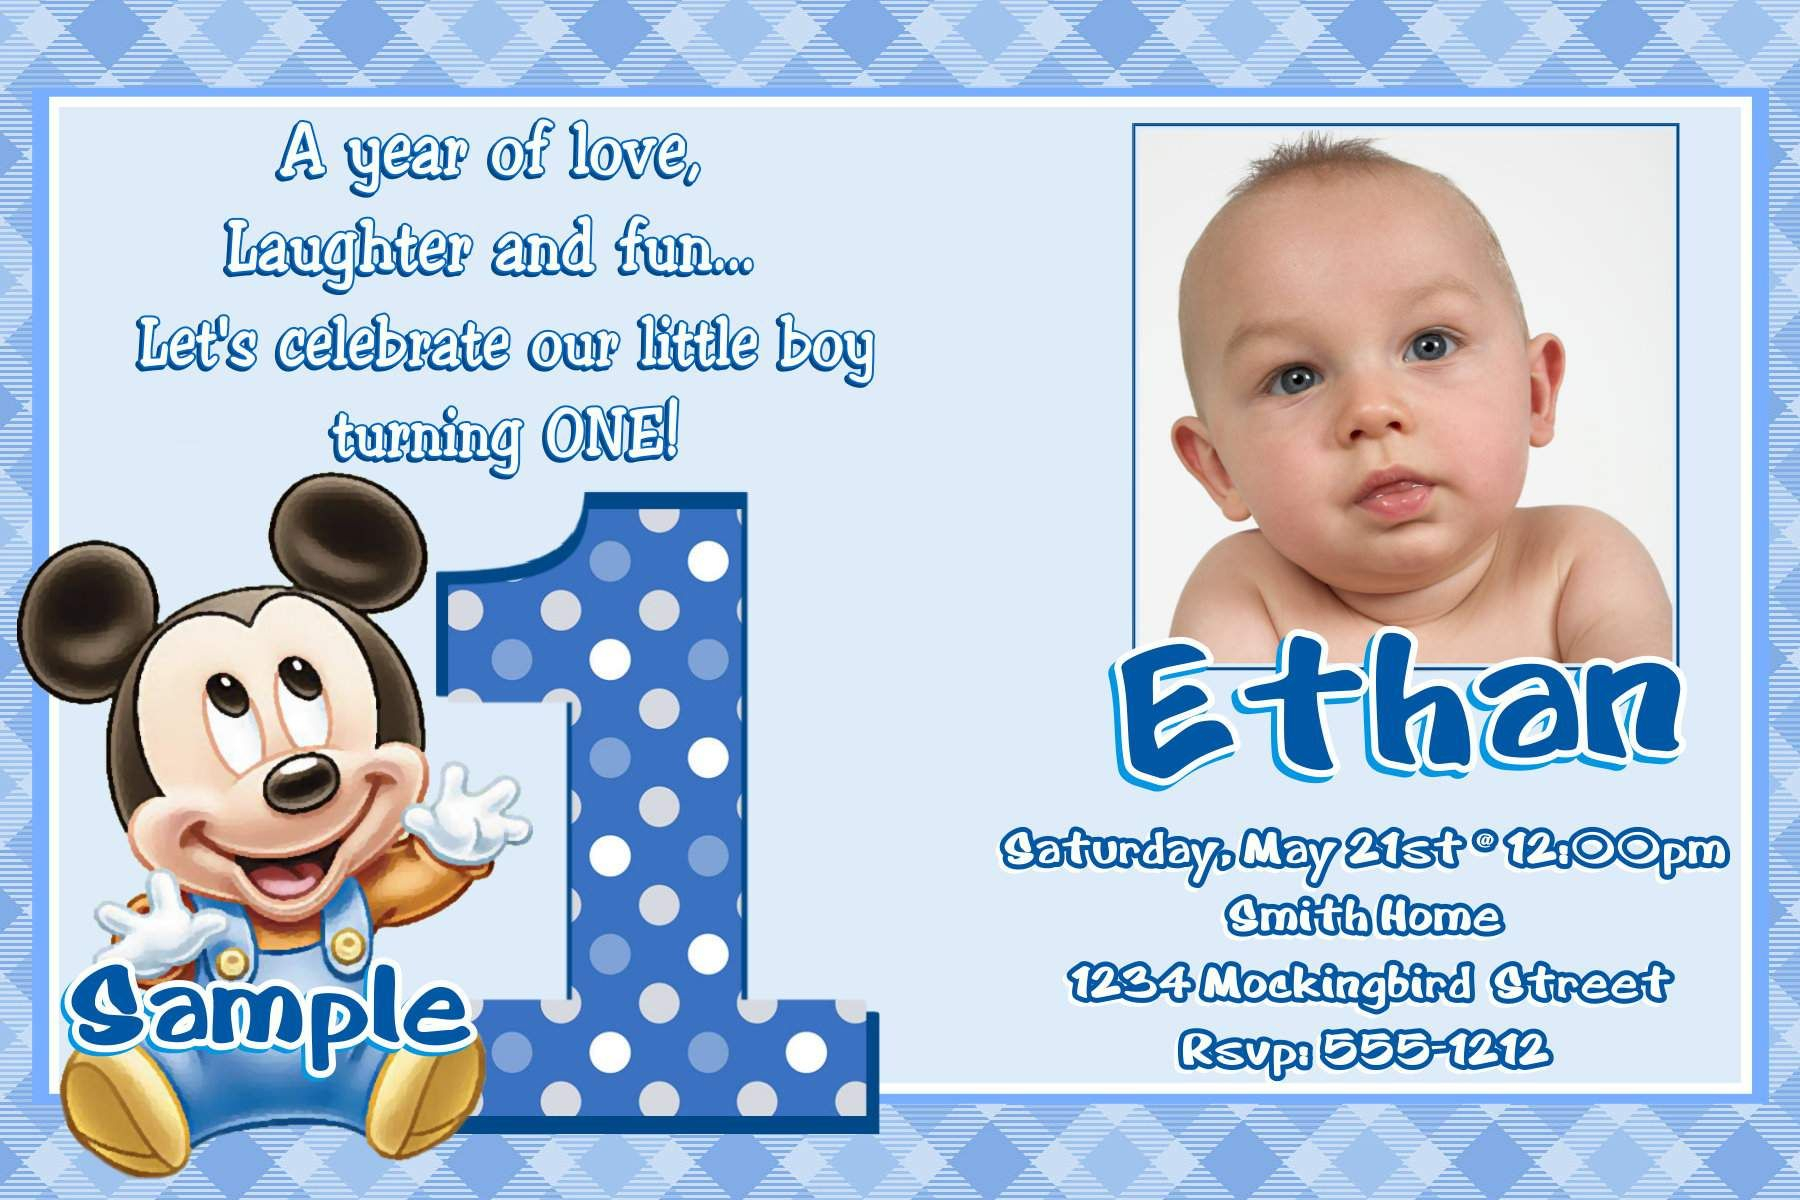 Image For Mickey Mouse Clubhouse 1st Birthday Invitations Ankita for size 1800 X 1200